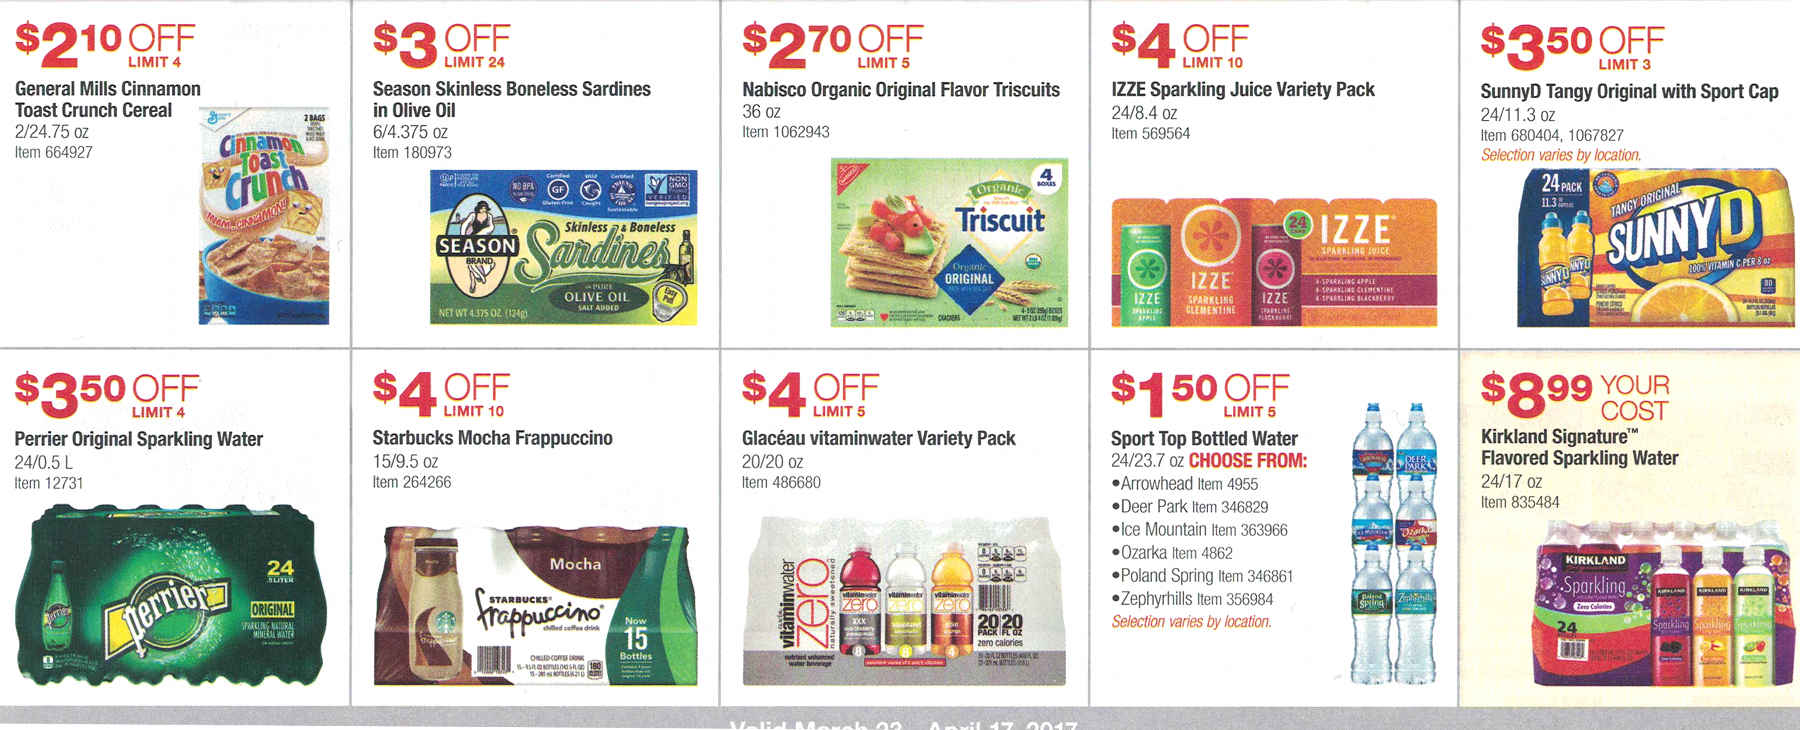 Coupon book full size page -> 8 <-